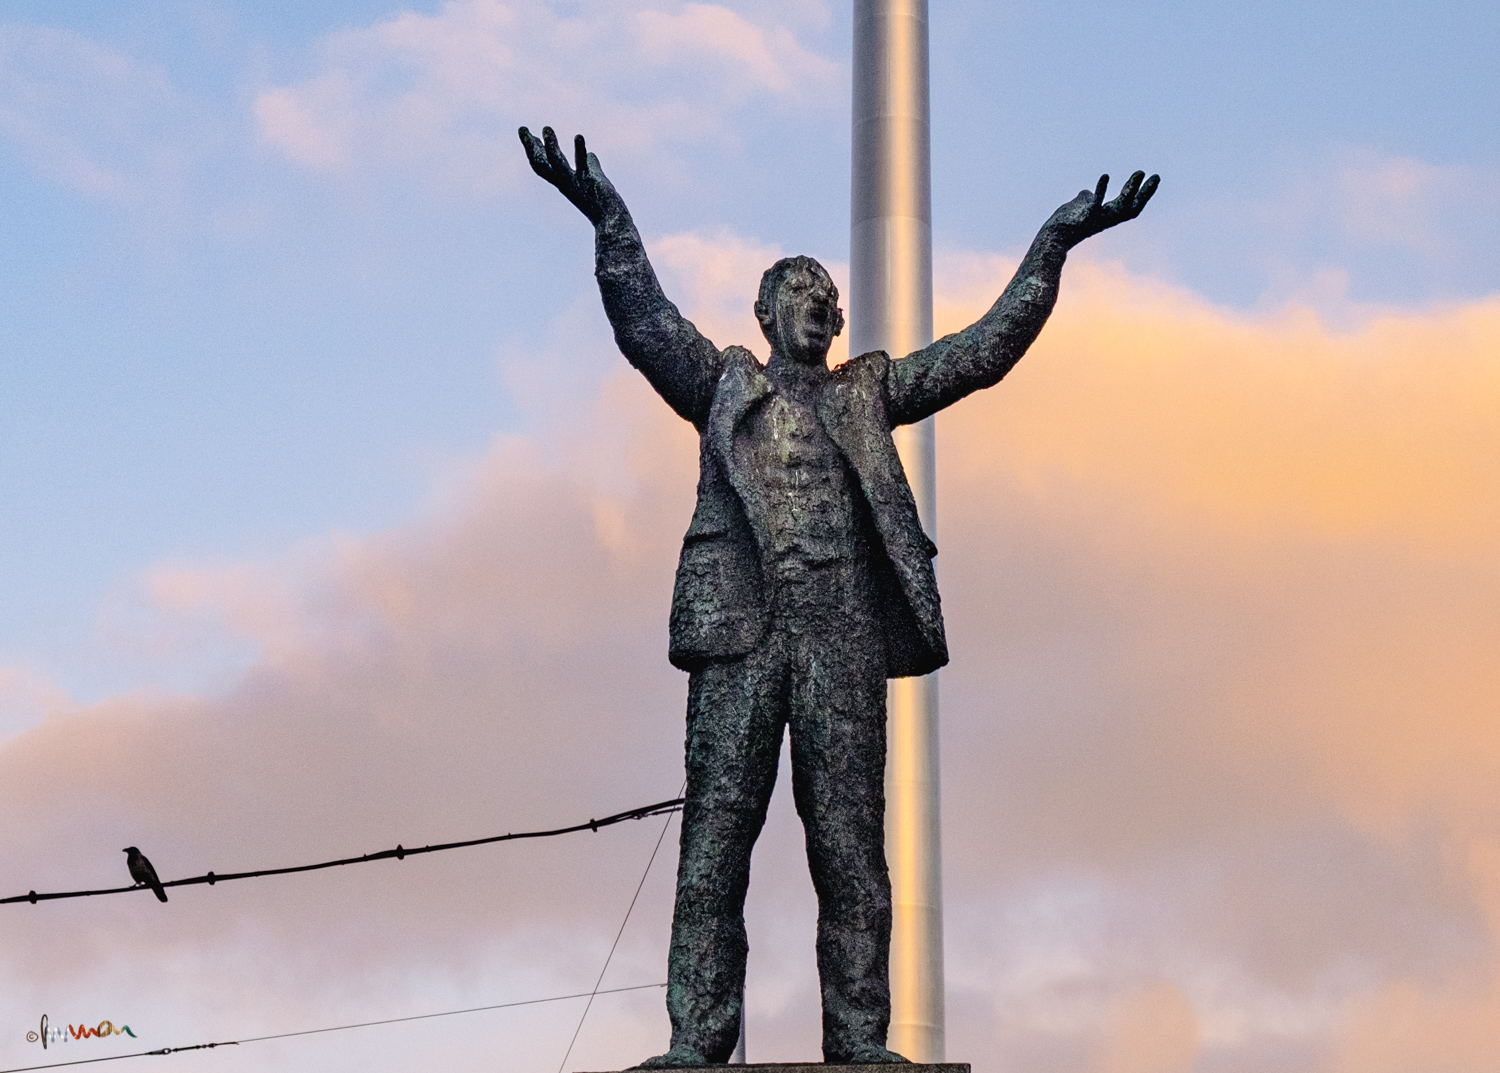 Jim Larkin Statue by Oisín Kelly, 1978. The Spire of Dublin by Ian Ritchie Architects, 2002/3. Arms open. Traduced. Where is Nelson's Pillar? No Monument Creamery either. Just a lone crow.